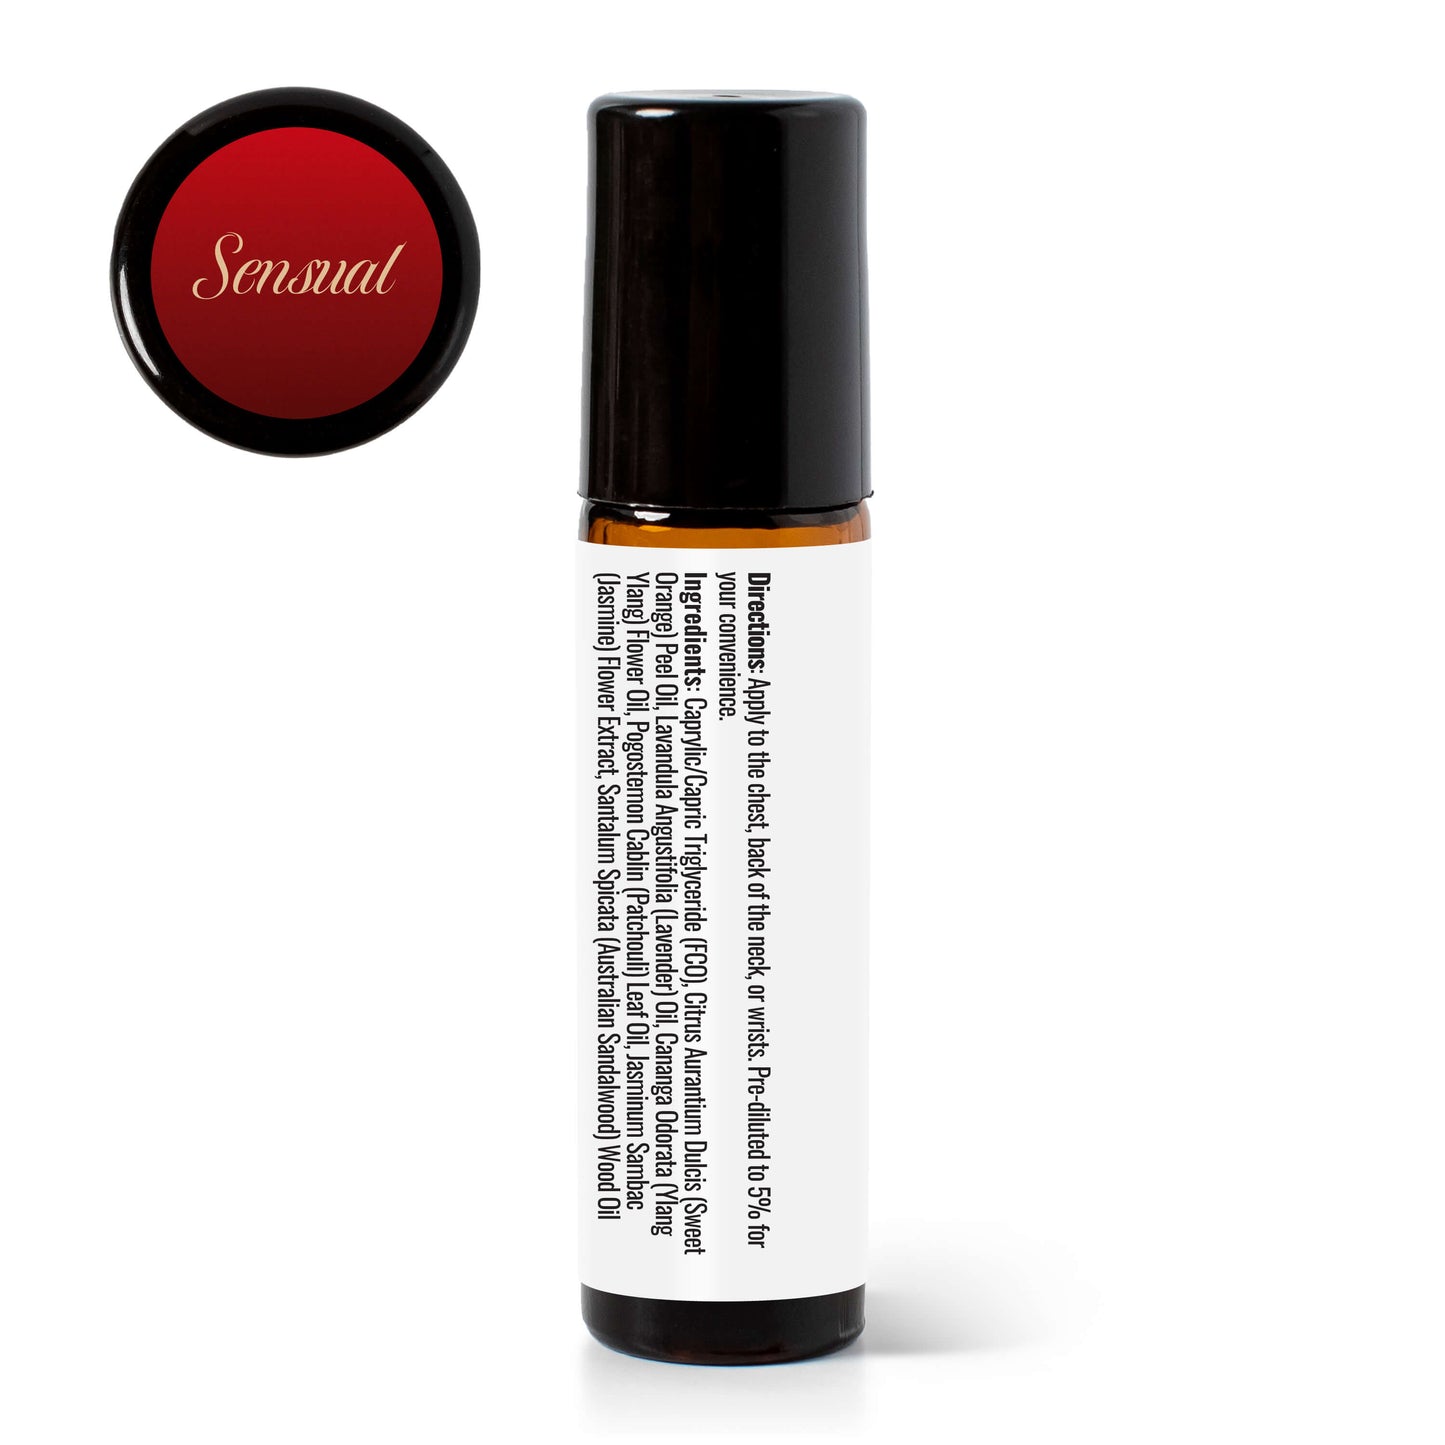 Sensual Essential Oil Blend Pre-Diluted Roll-On back label